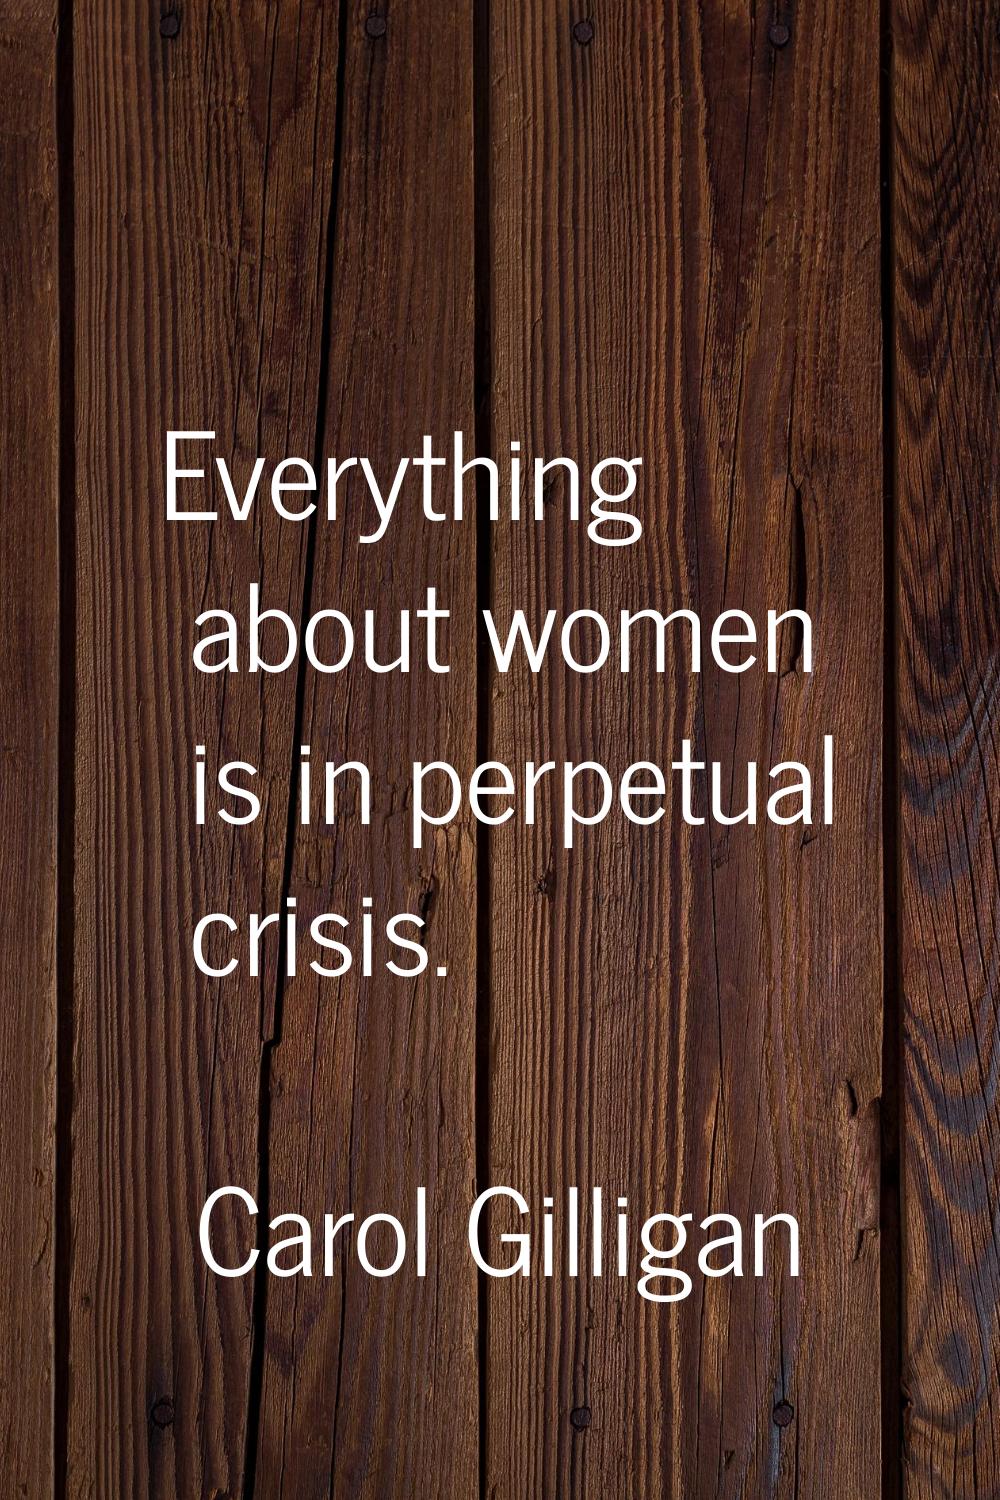 Everything about women is in perpetual crisis.